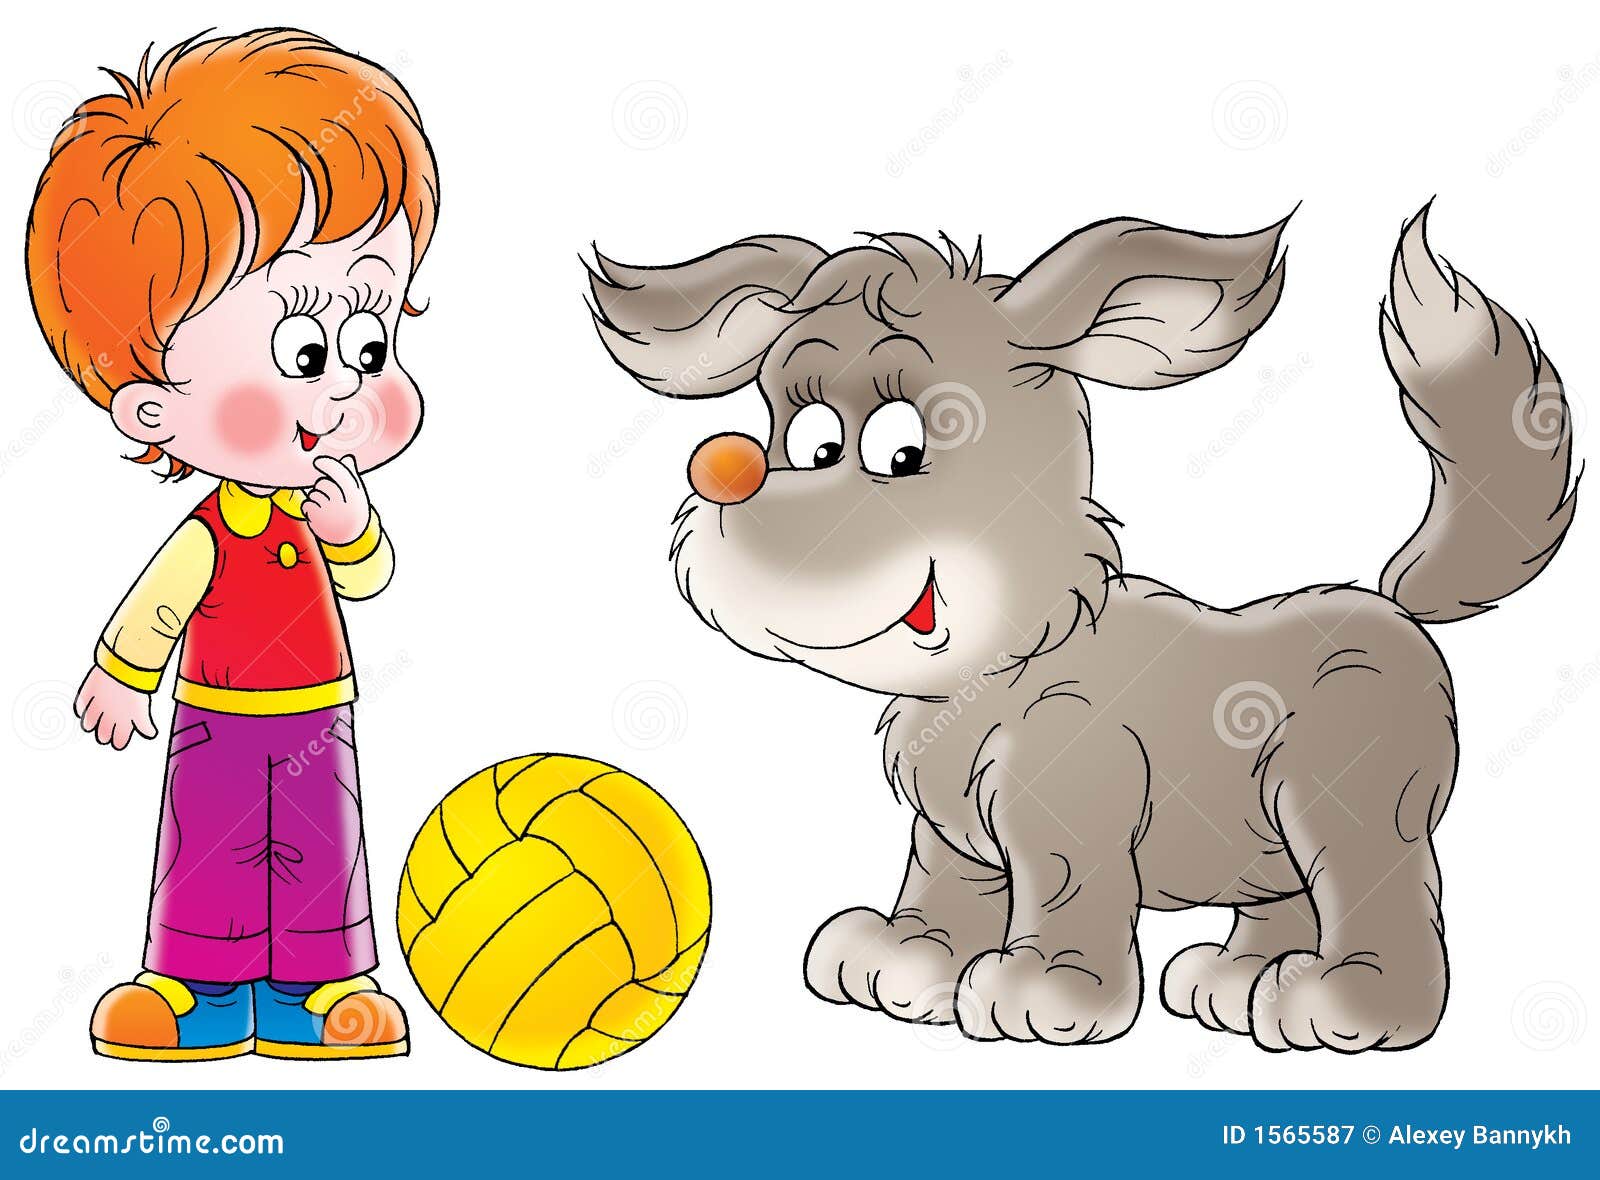 clipart boy and dog - photo #33